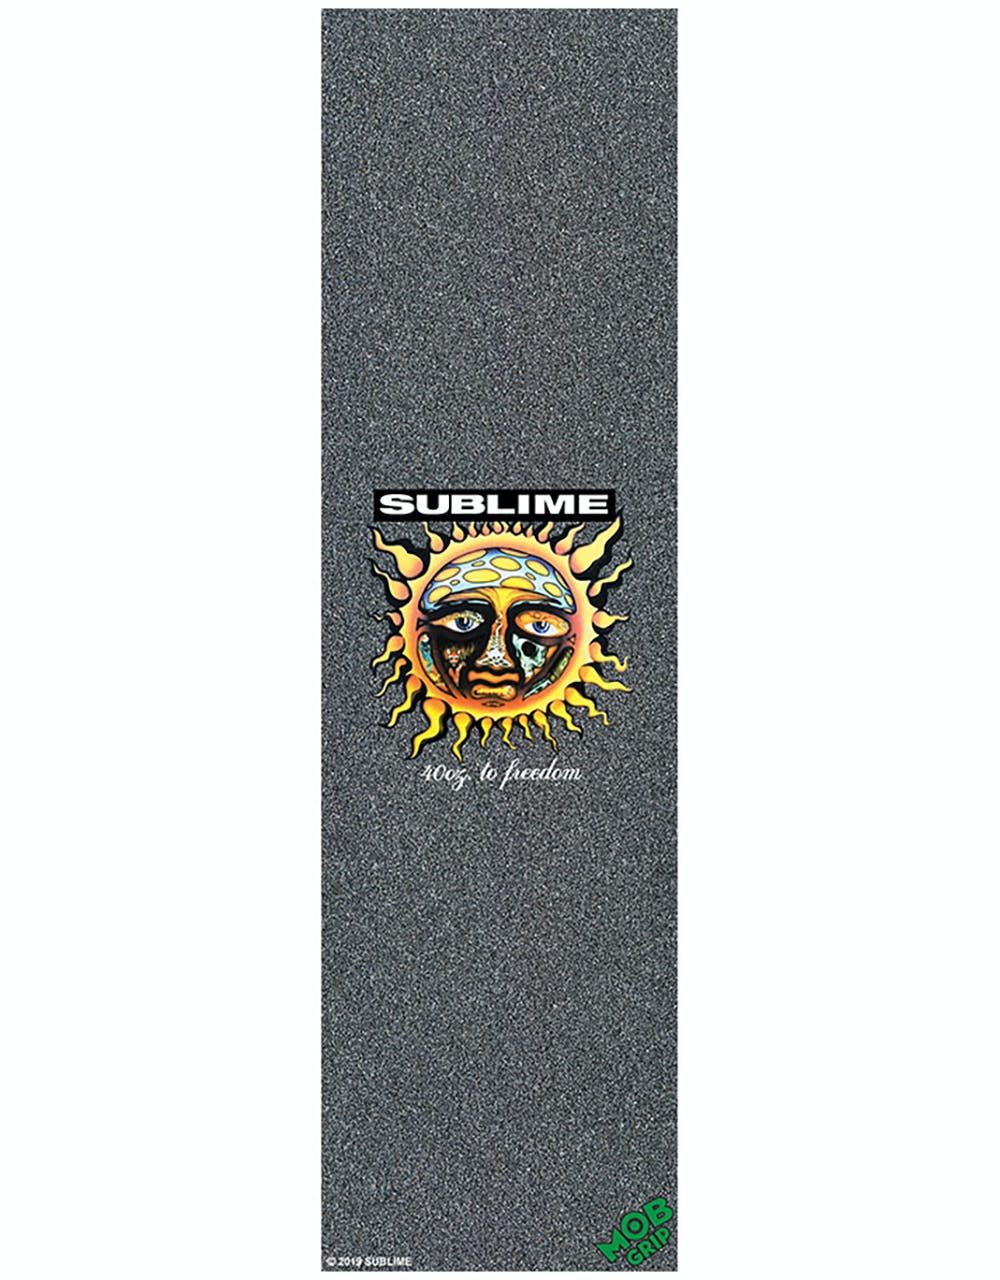 MOB x Sublime 40oz to Freedom 9" Graphic Grip Tape Sheet